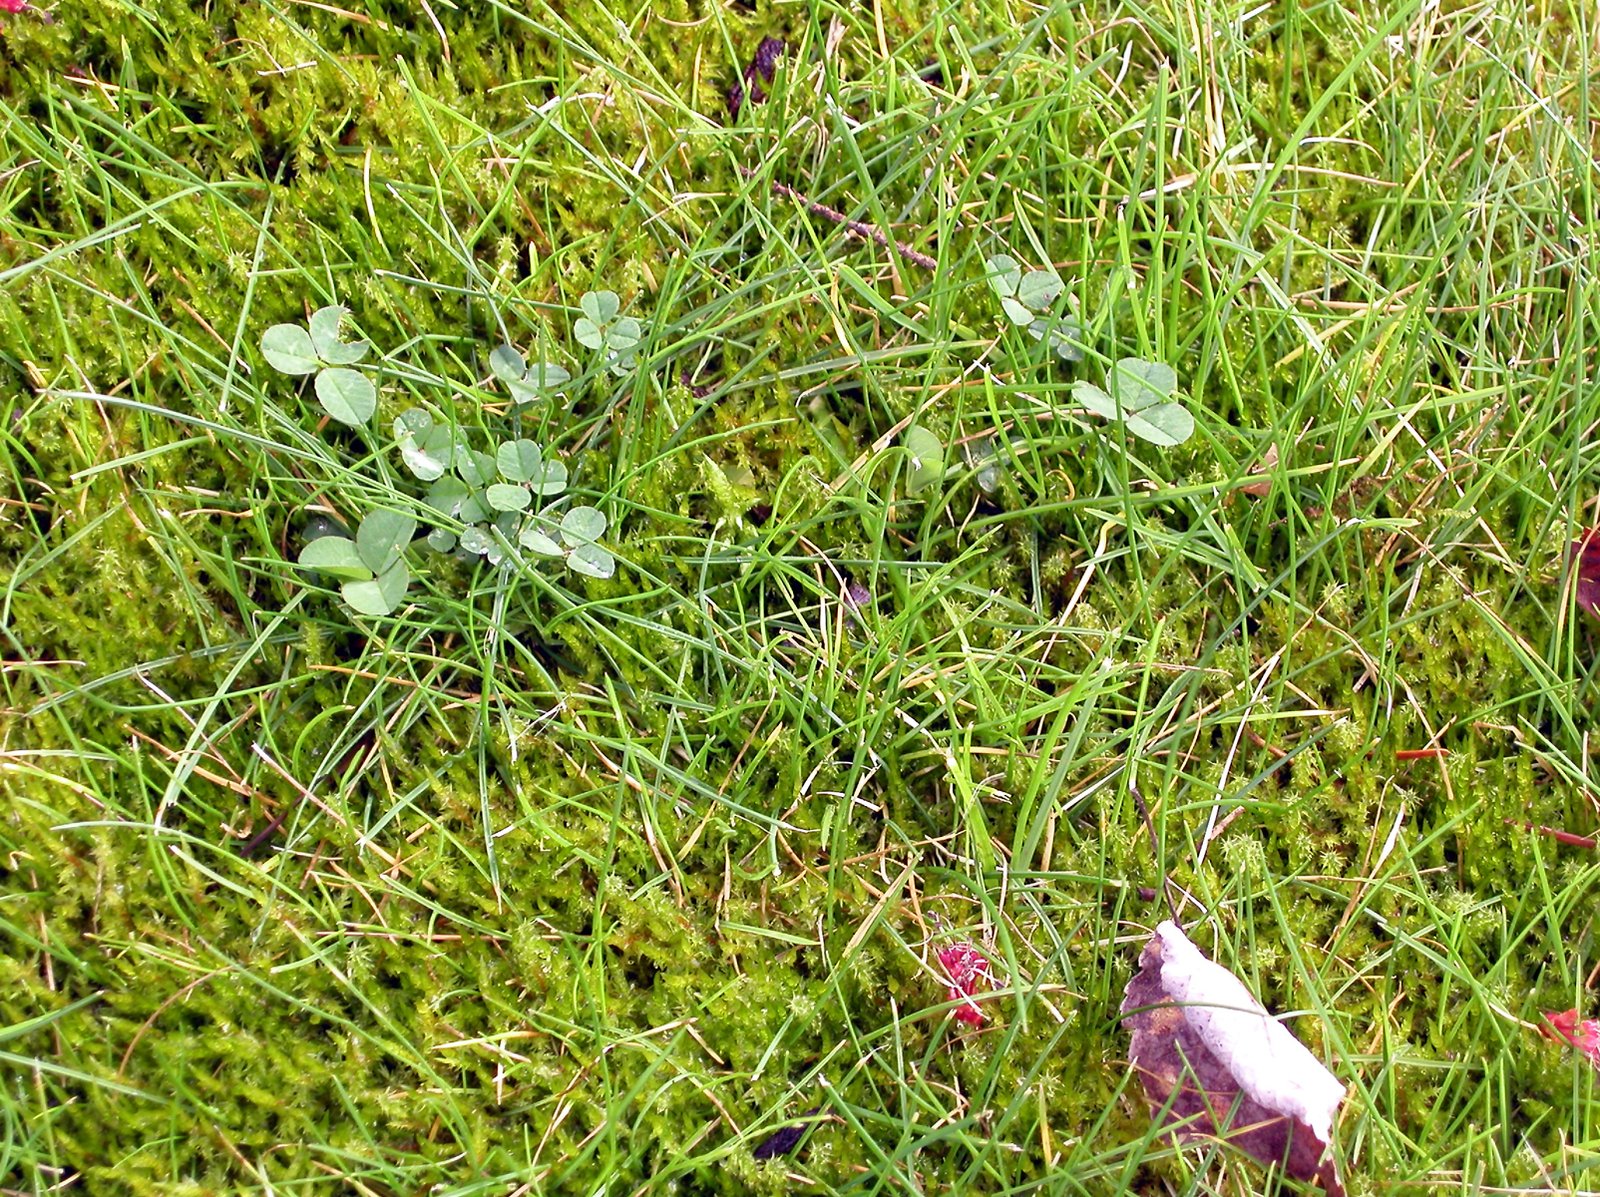 several different leaves are placed on a patch of grass